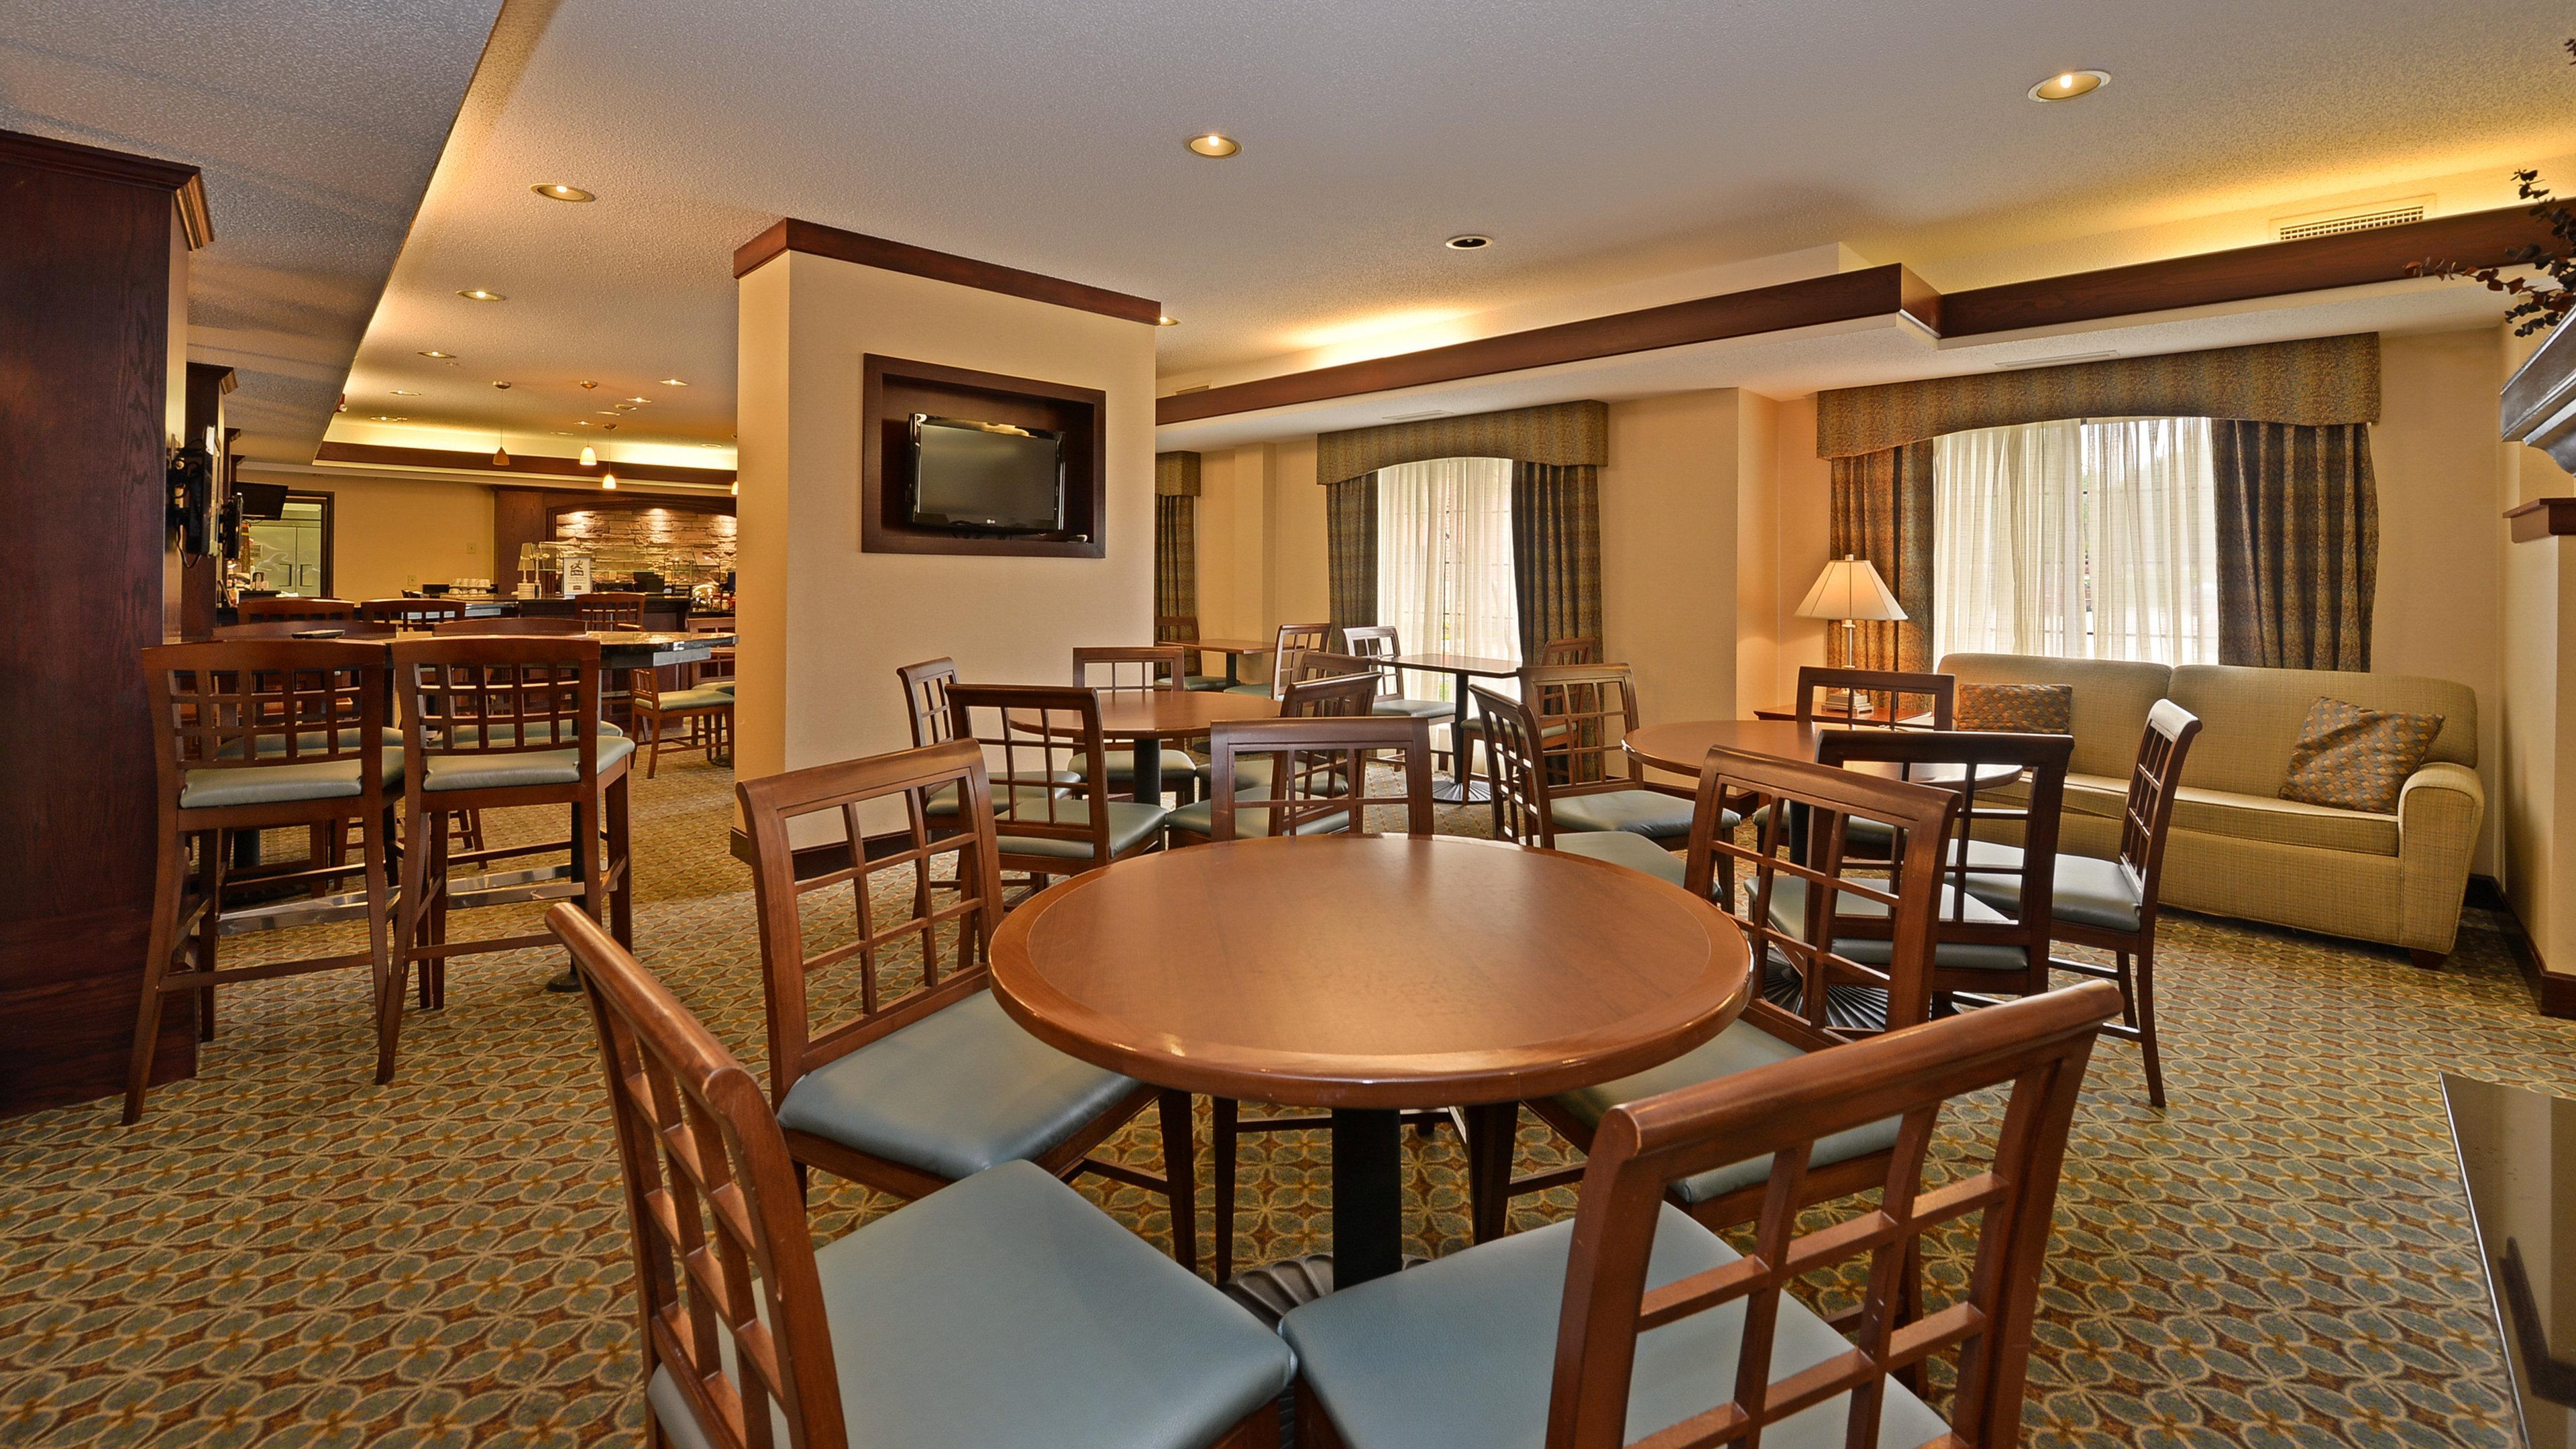 West Des Moines Hotels  Top 10 Hotels in West Des Moines, Iowa by IHG